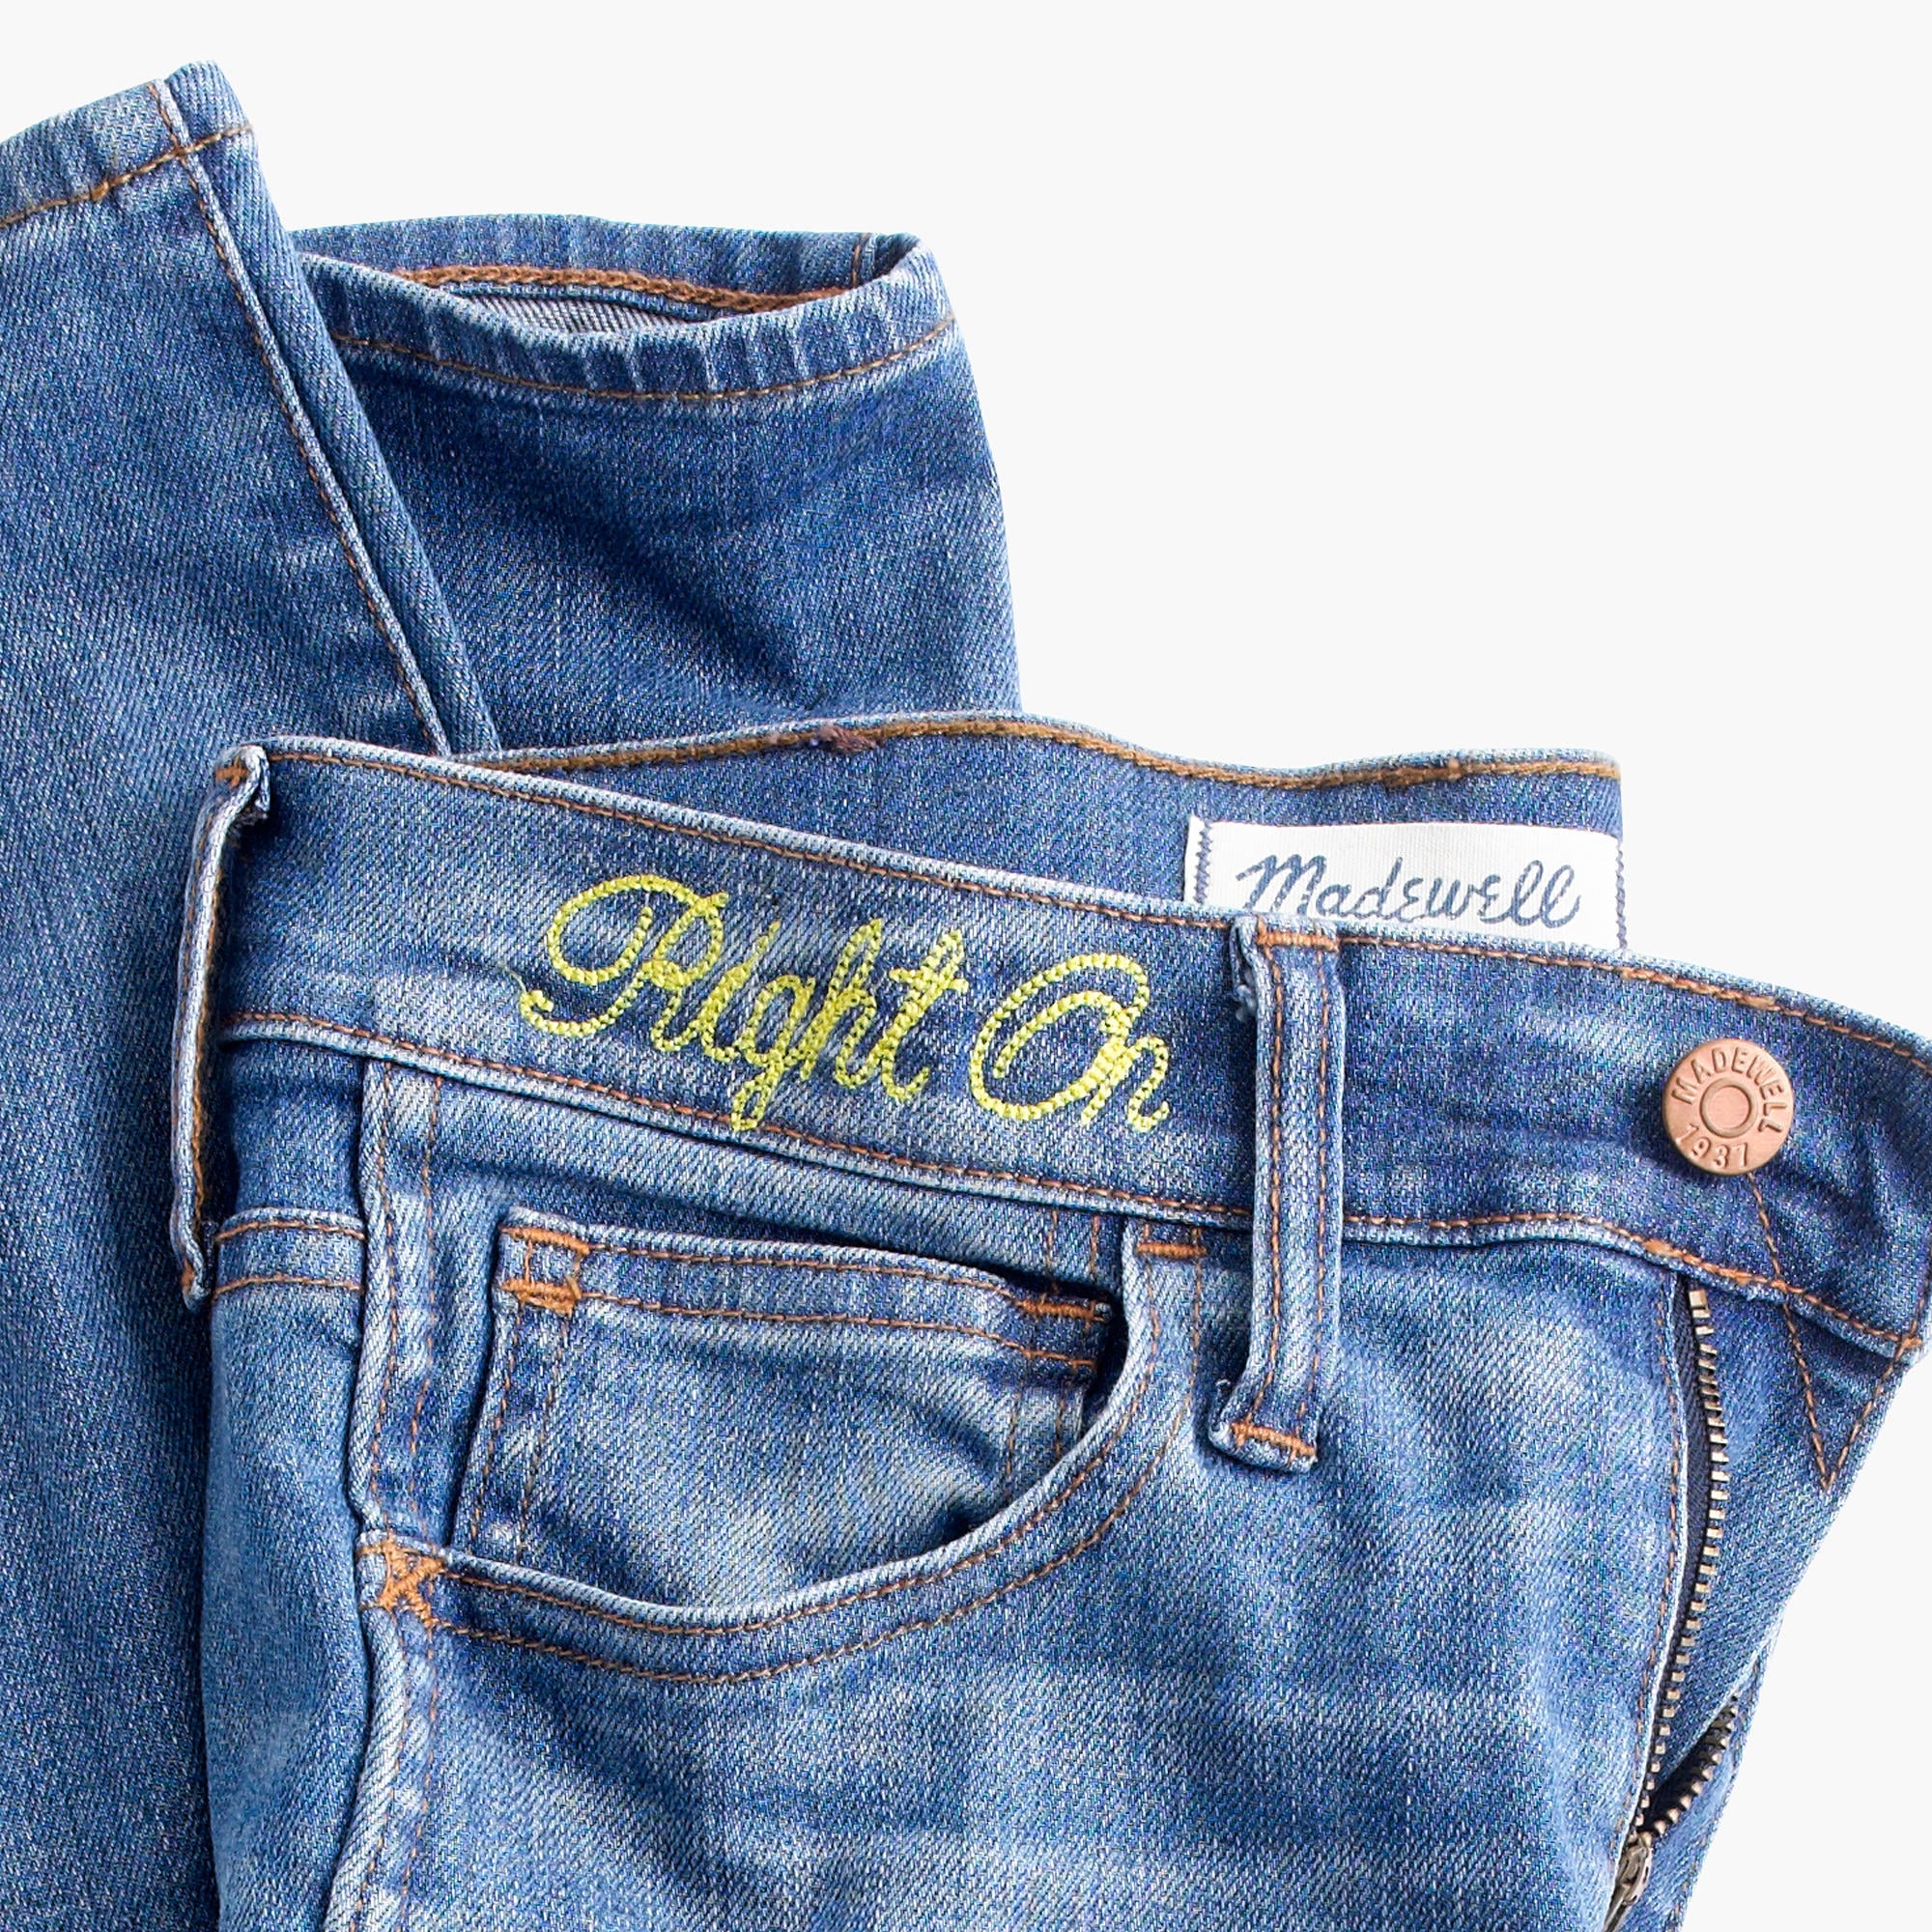 madewell personalized jeans